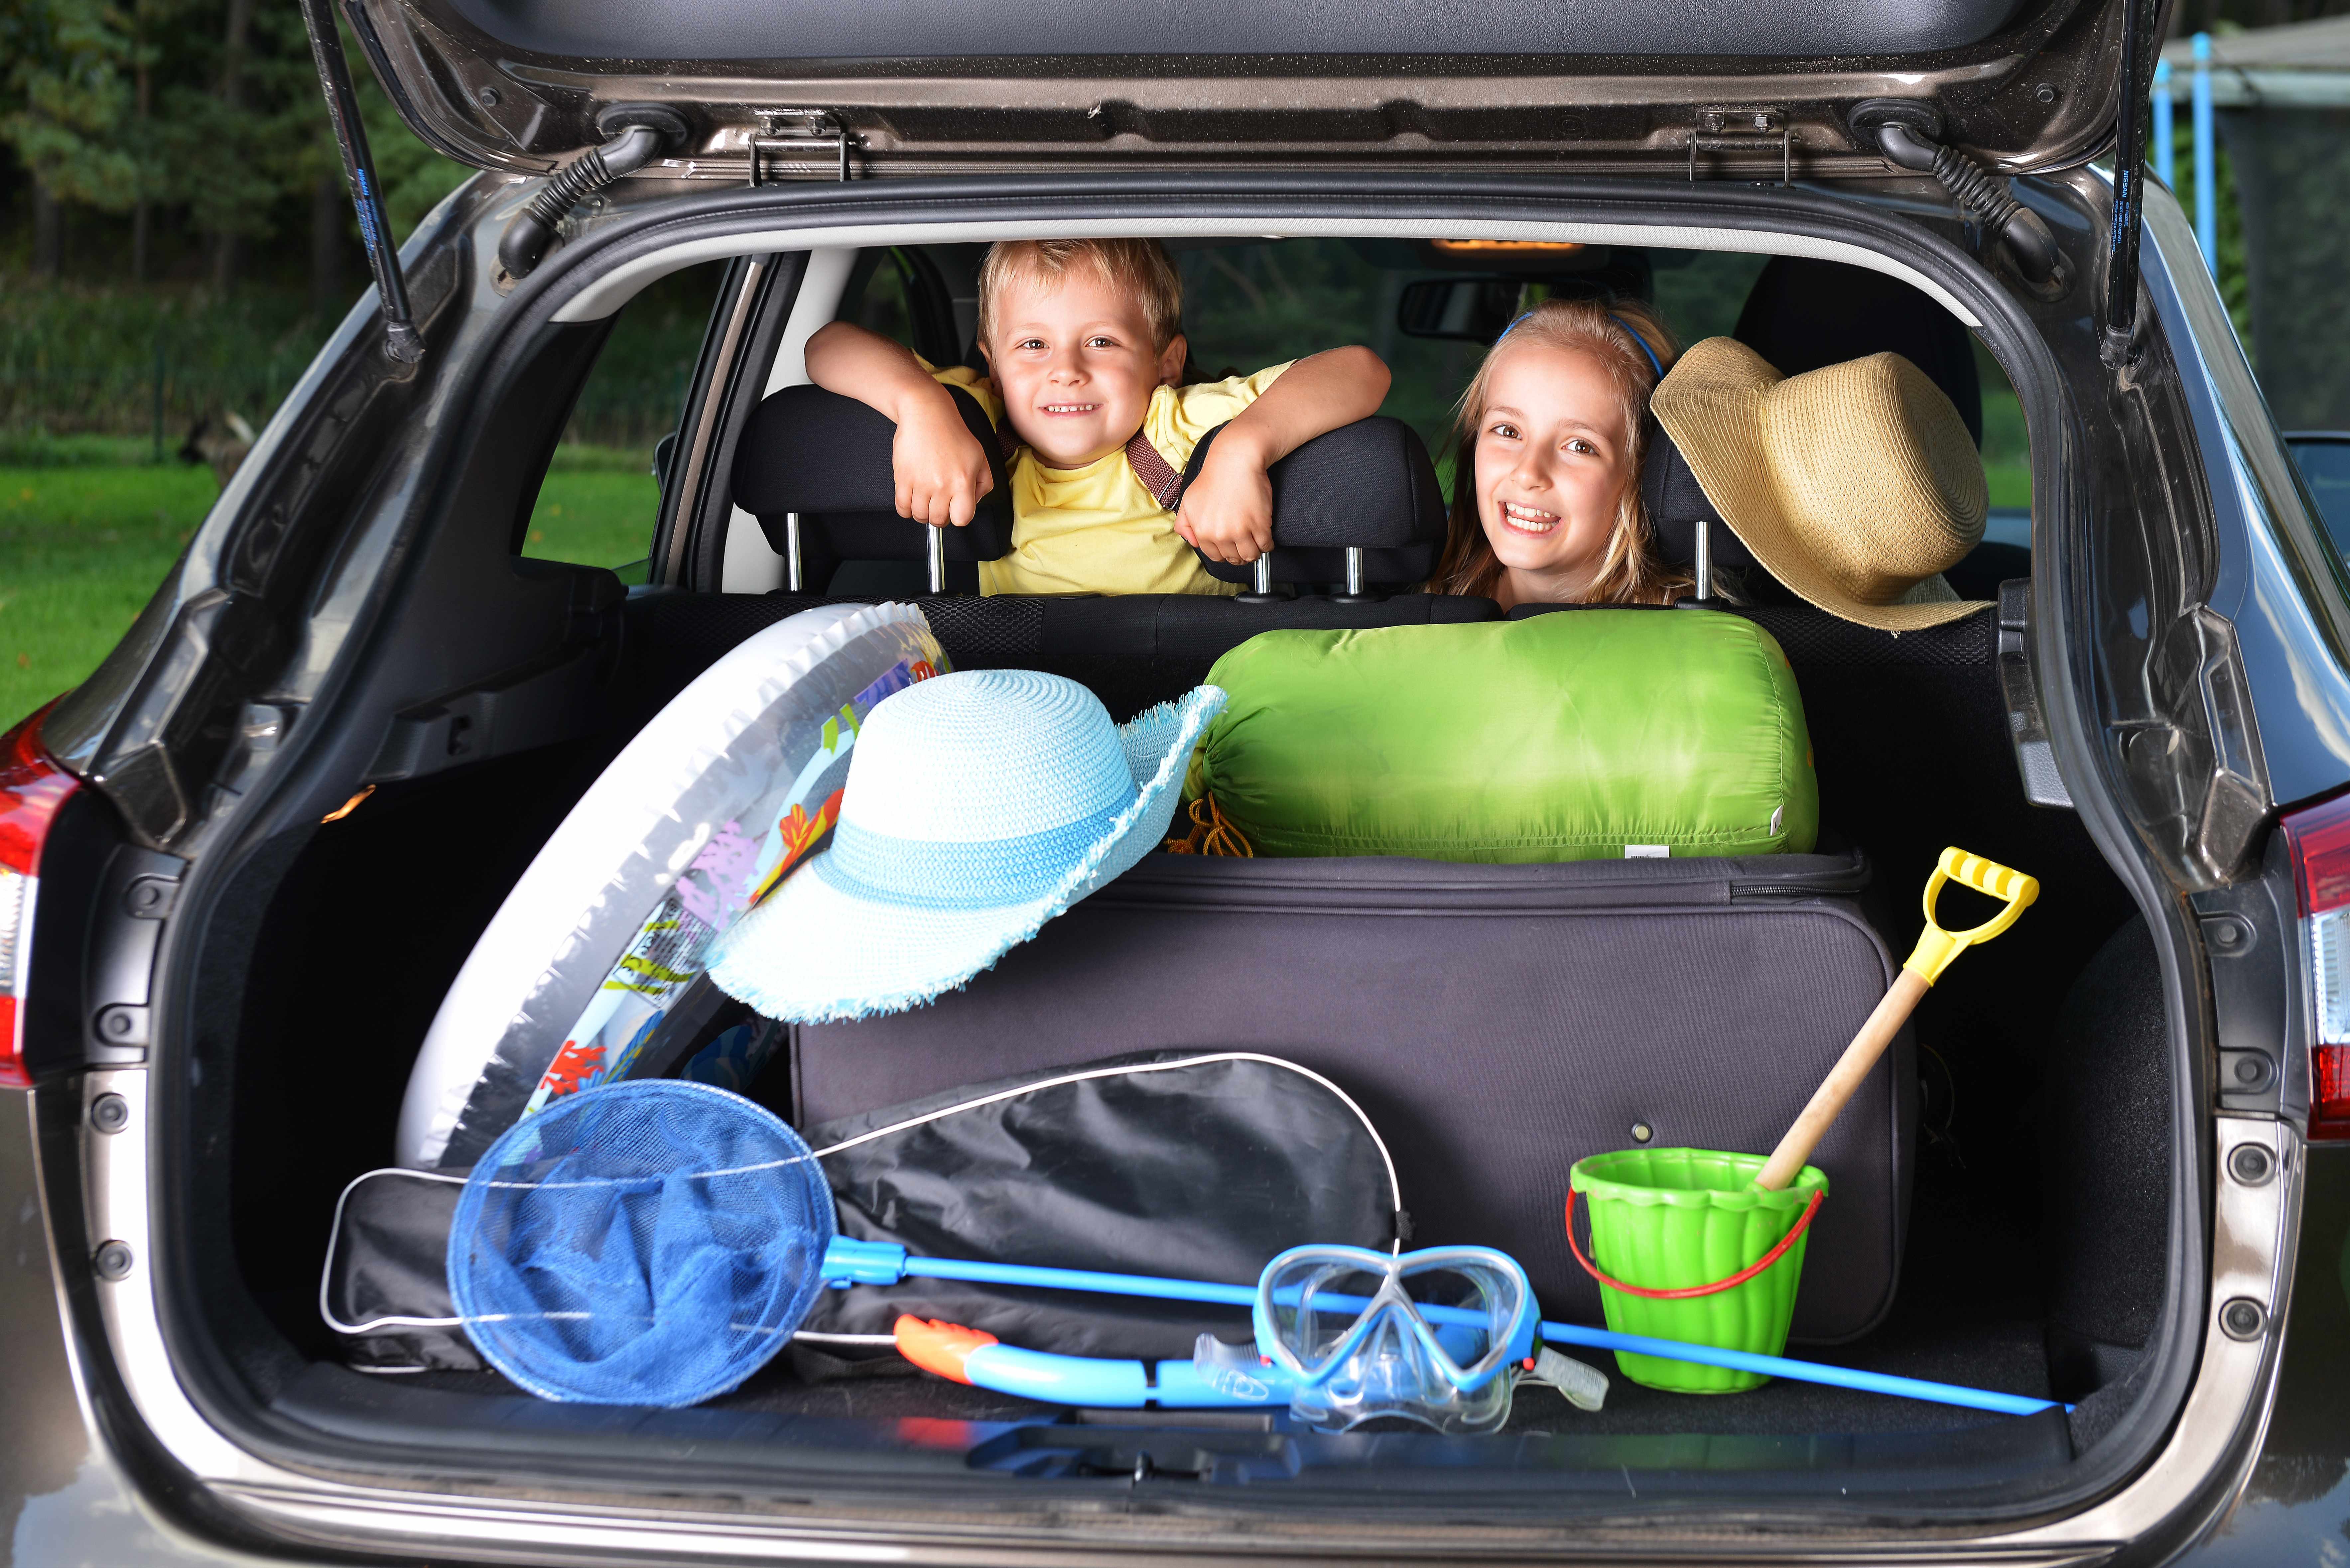 two children in a car with beach toys and vacation items packed in the back